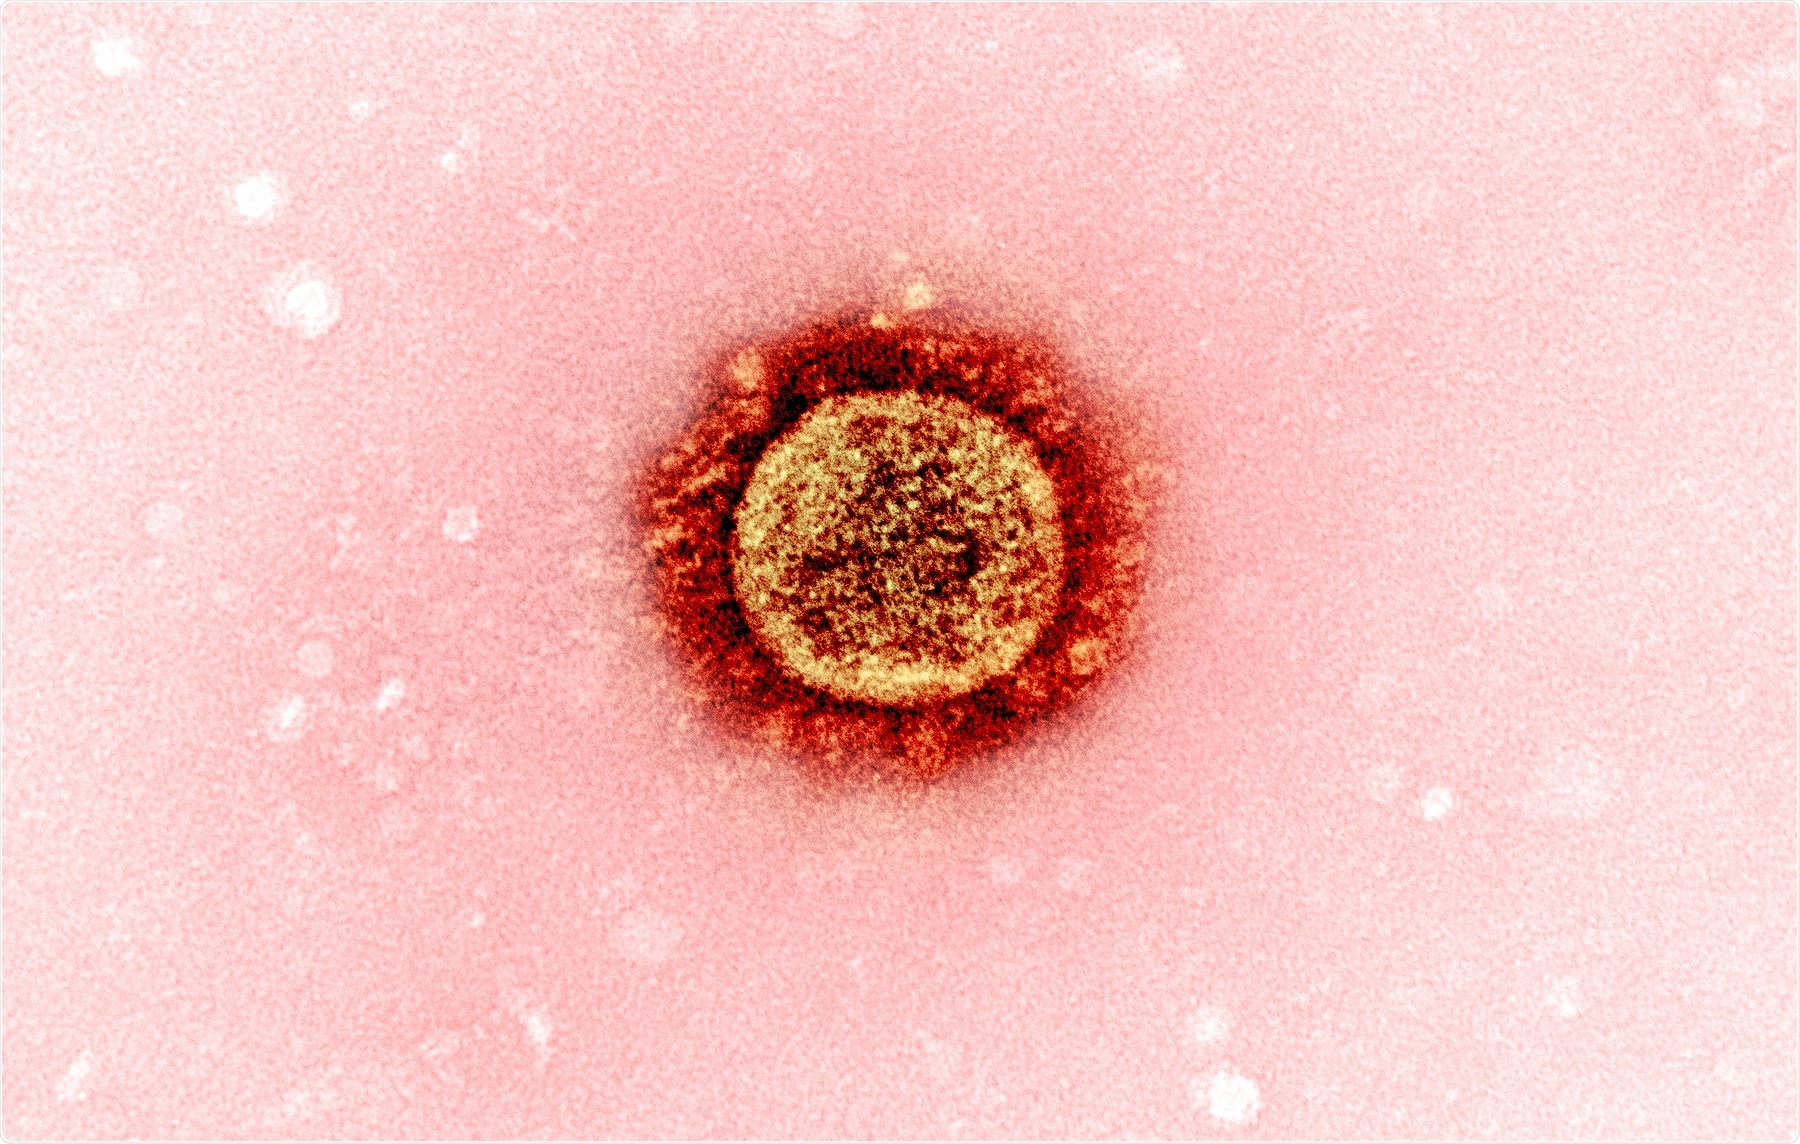 Study: A comparative recombination analysis of human coronaviruses and implications for the SARS-CoV-2 pandemic. Image Credit: NIAID